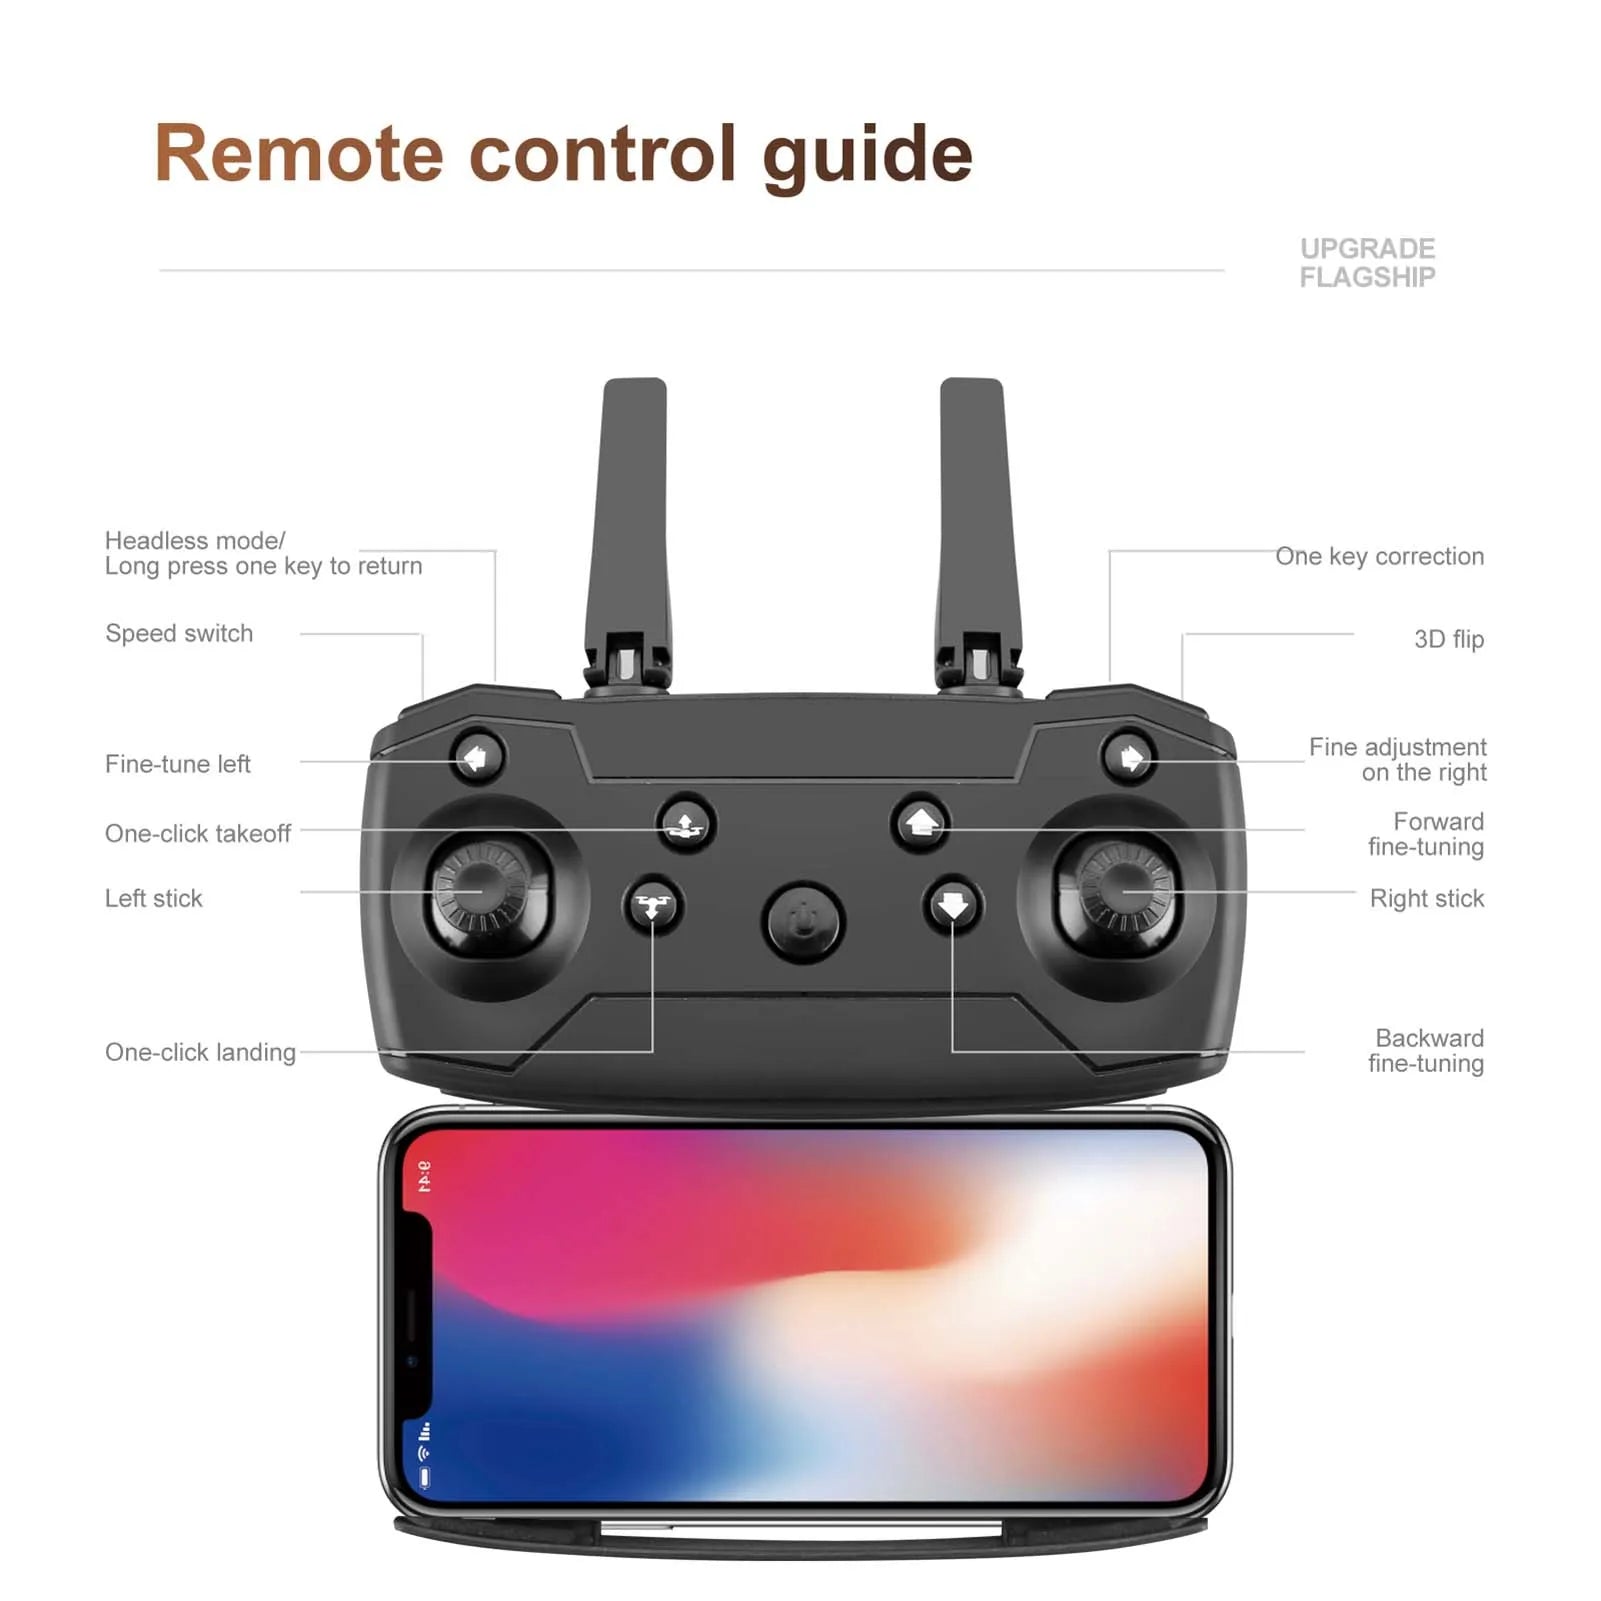 S89 Drone, remote control guide upgrade flagship headless model press one to return one correction